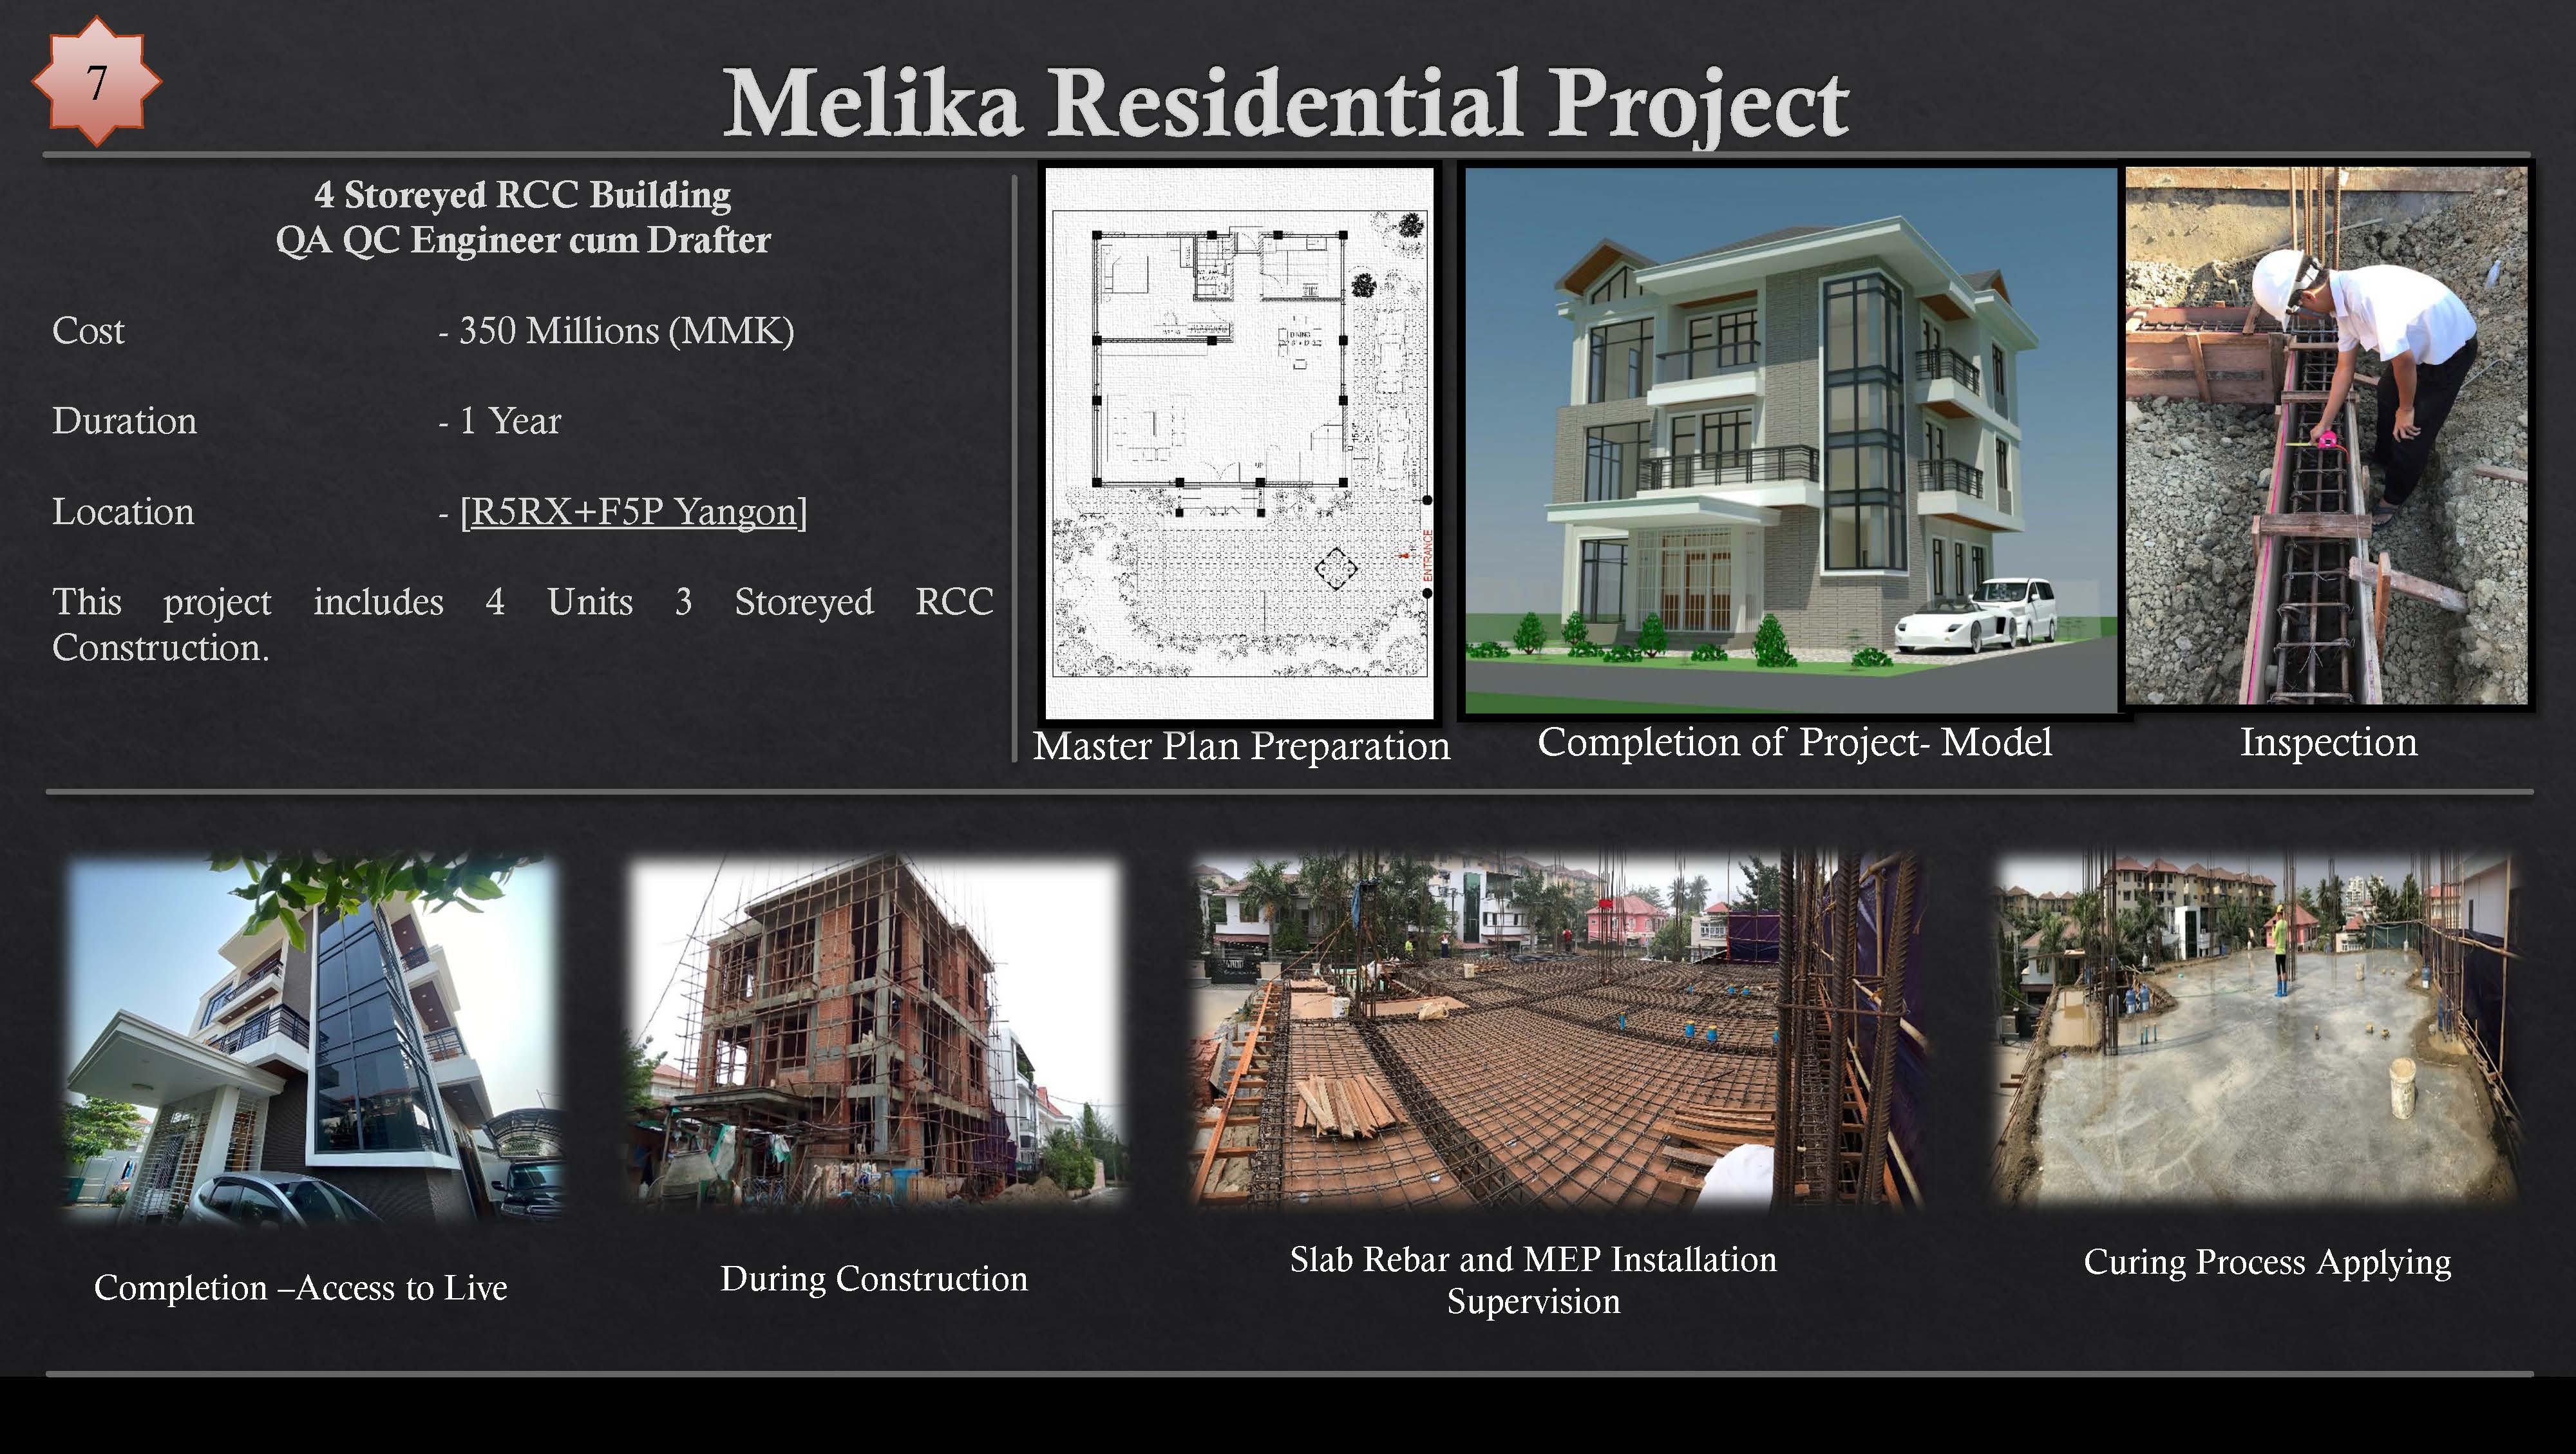 Melika Residential Project

  
  
 
 
   
 

4 Storeyed RCC Building
QA QC Engineer cum Drafter
(Glos - 350 Millions (MMK)
Duration - 1 Year
Location - [RSRX+F5P Yangon]

This project includes 4 Units 3 Storeyed RCC
Construction.

 
 
 

is =X
Ne

 

Slab Rebar and MEP Installation Curing Process Applying

ion — i During Construction hr!
Completion —Access to Live 8 Sa